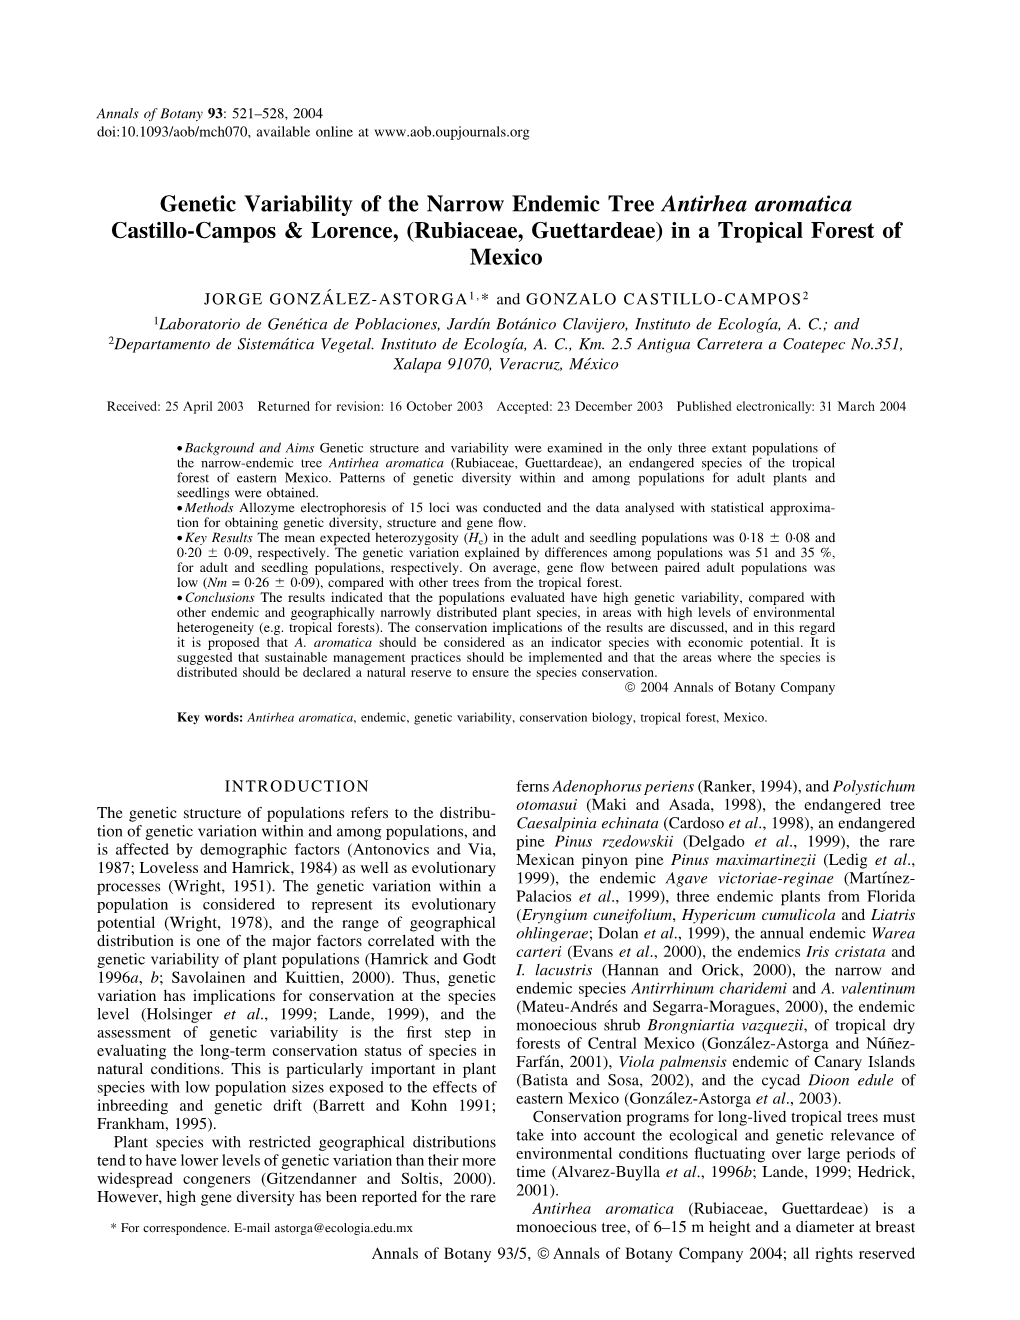 Genetic Variability of the Narrow Endemic Tree Antirhea Aromatica Castillo-Campos & Lorence, (Rubiaceae, Guettardeae) in a Tropical Forest of Mexico